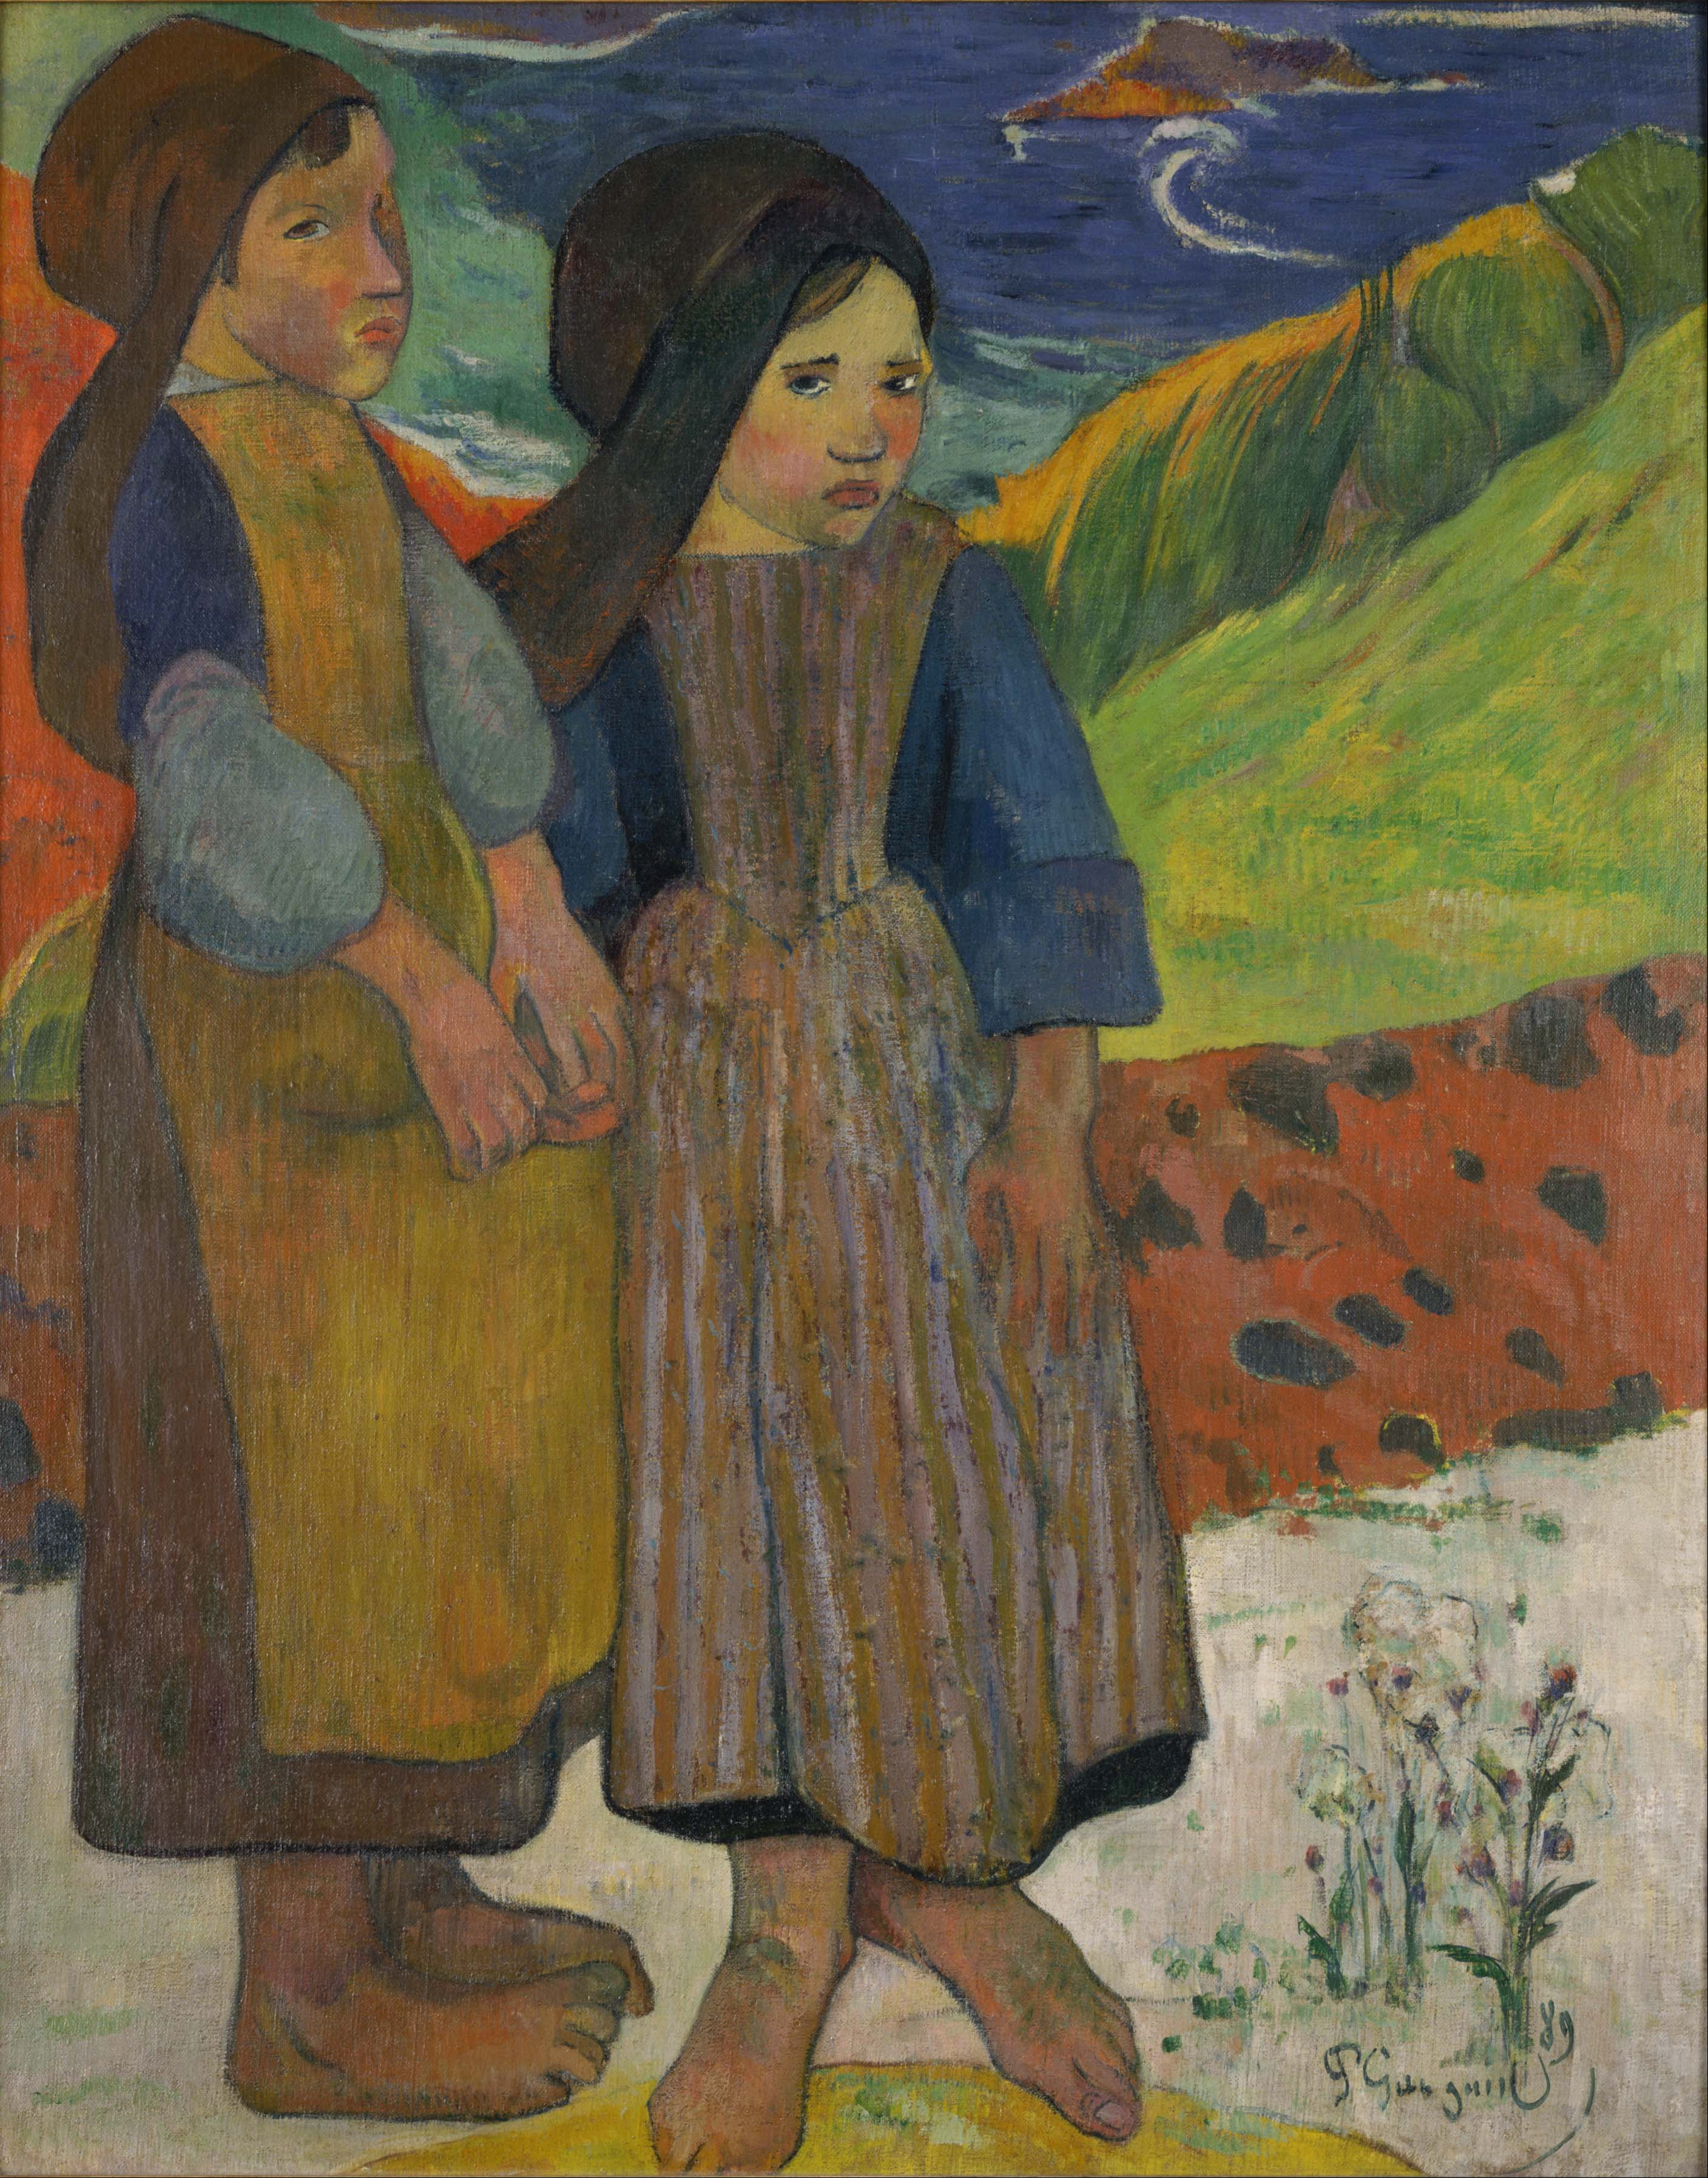 Two Breton Girls by the Sea by Paul Gauguin - 1889 - 73.6 x 92.5 cm The National Museum of Western Art, Tokyo